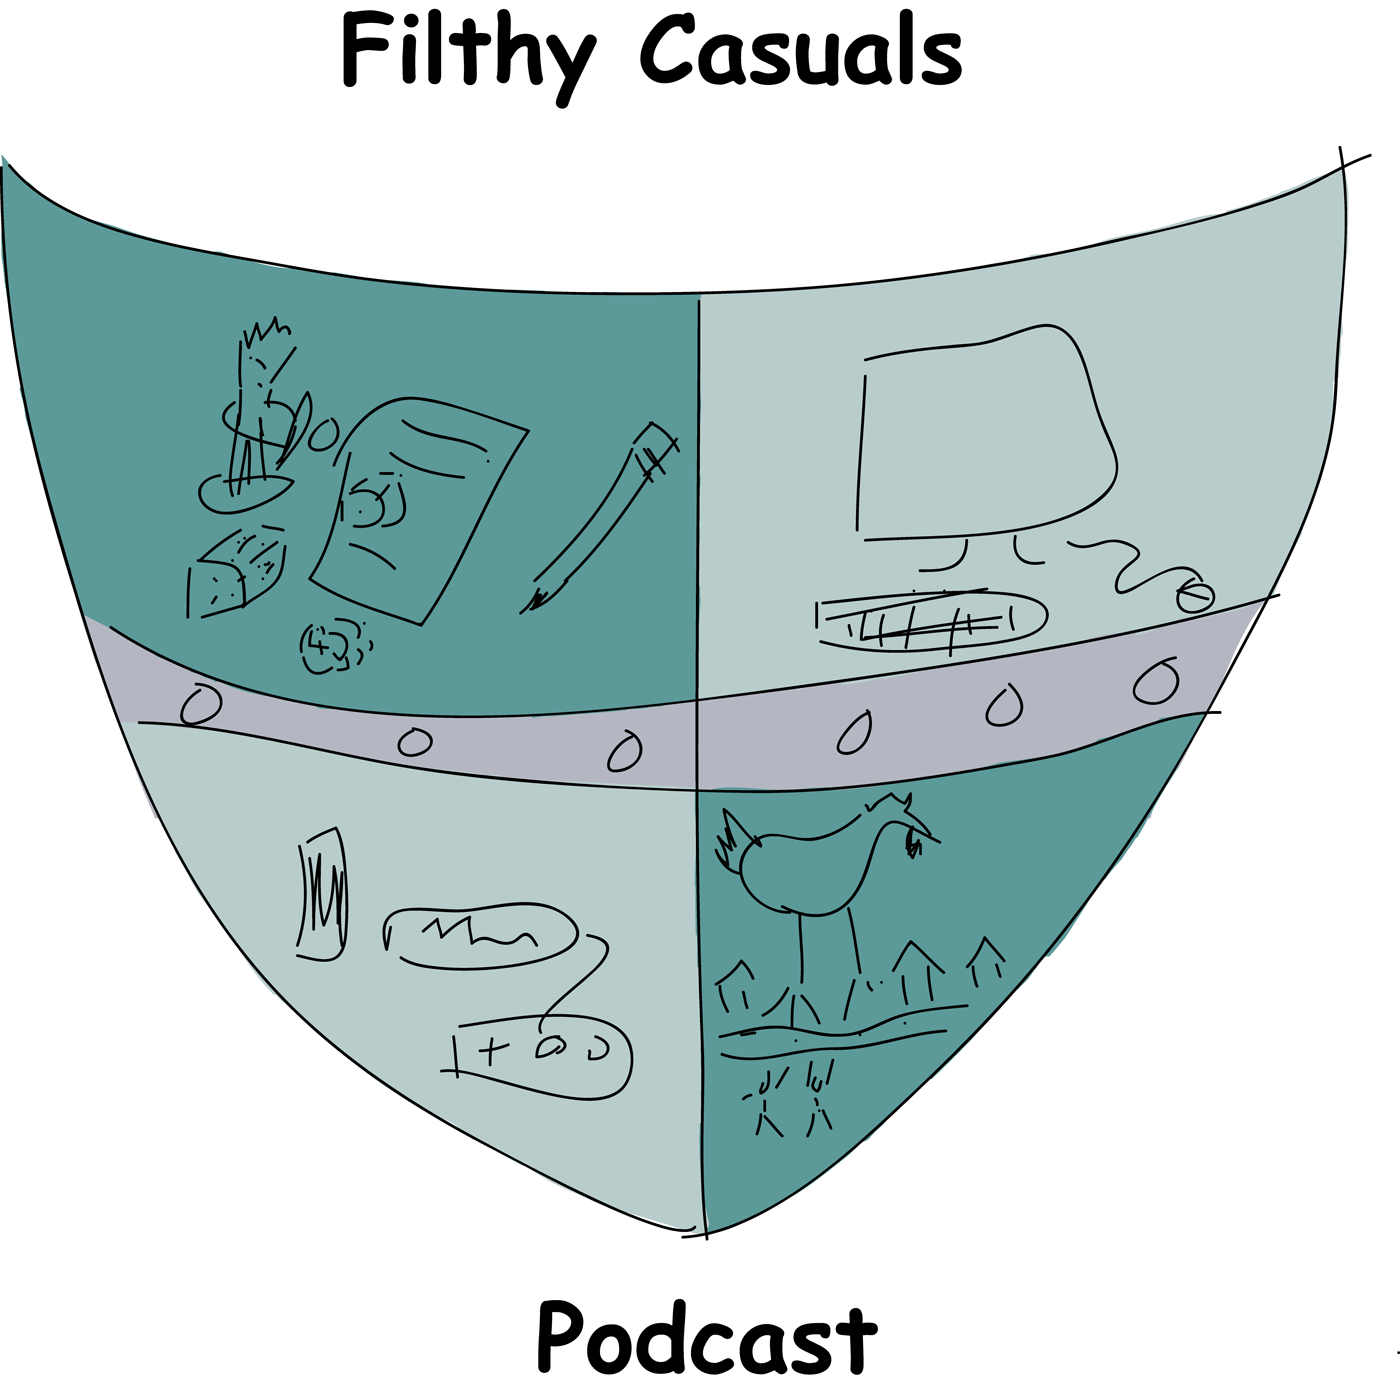 Filthy Casuals Podcast